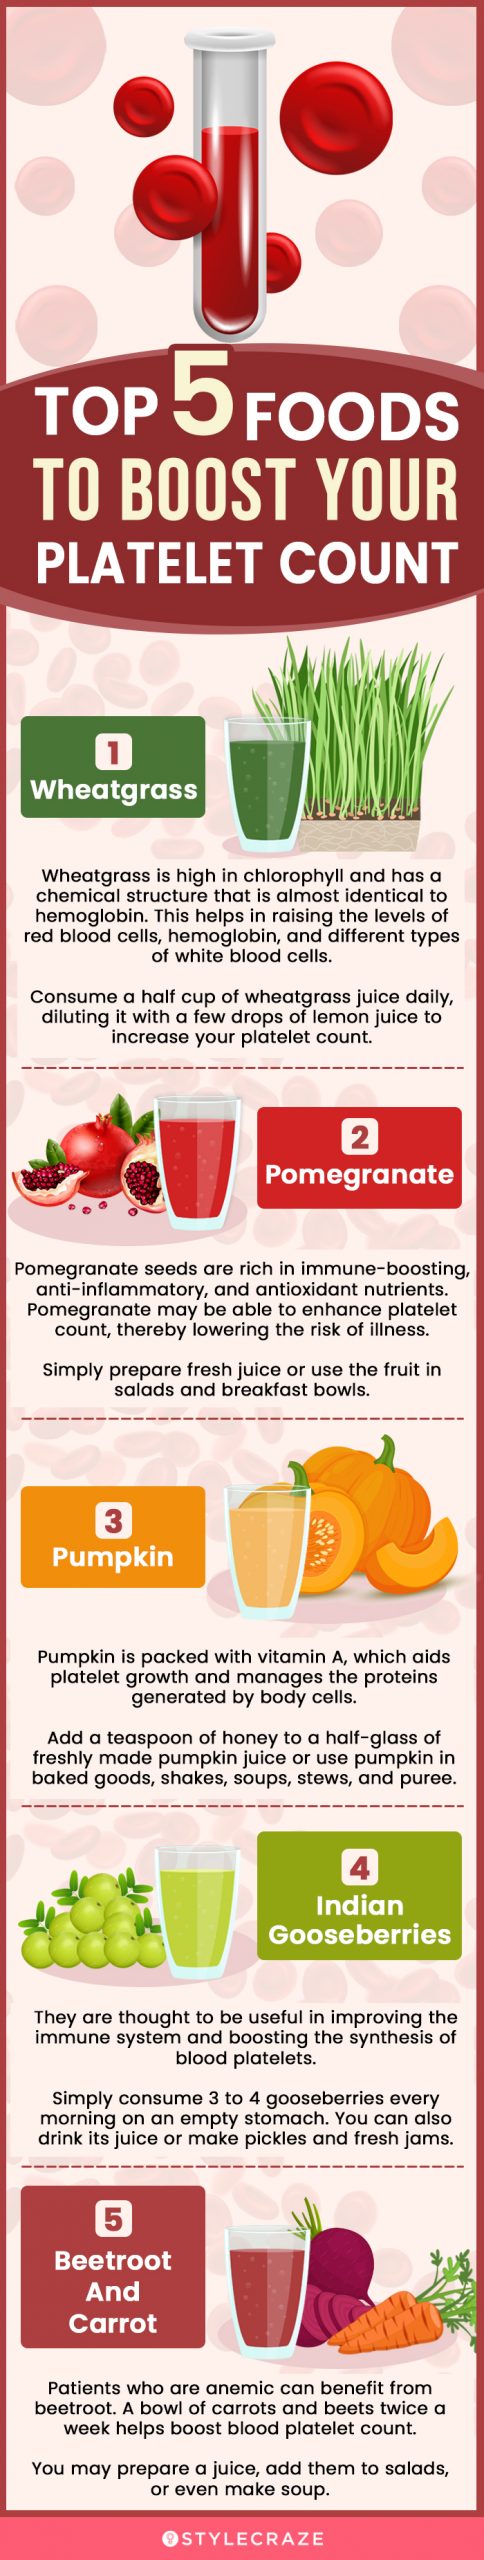 top 5 foods to boost your platelet count [infographic]